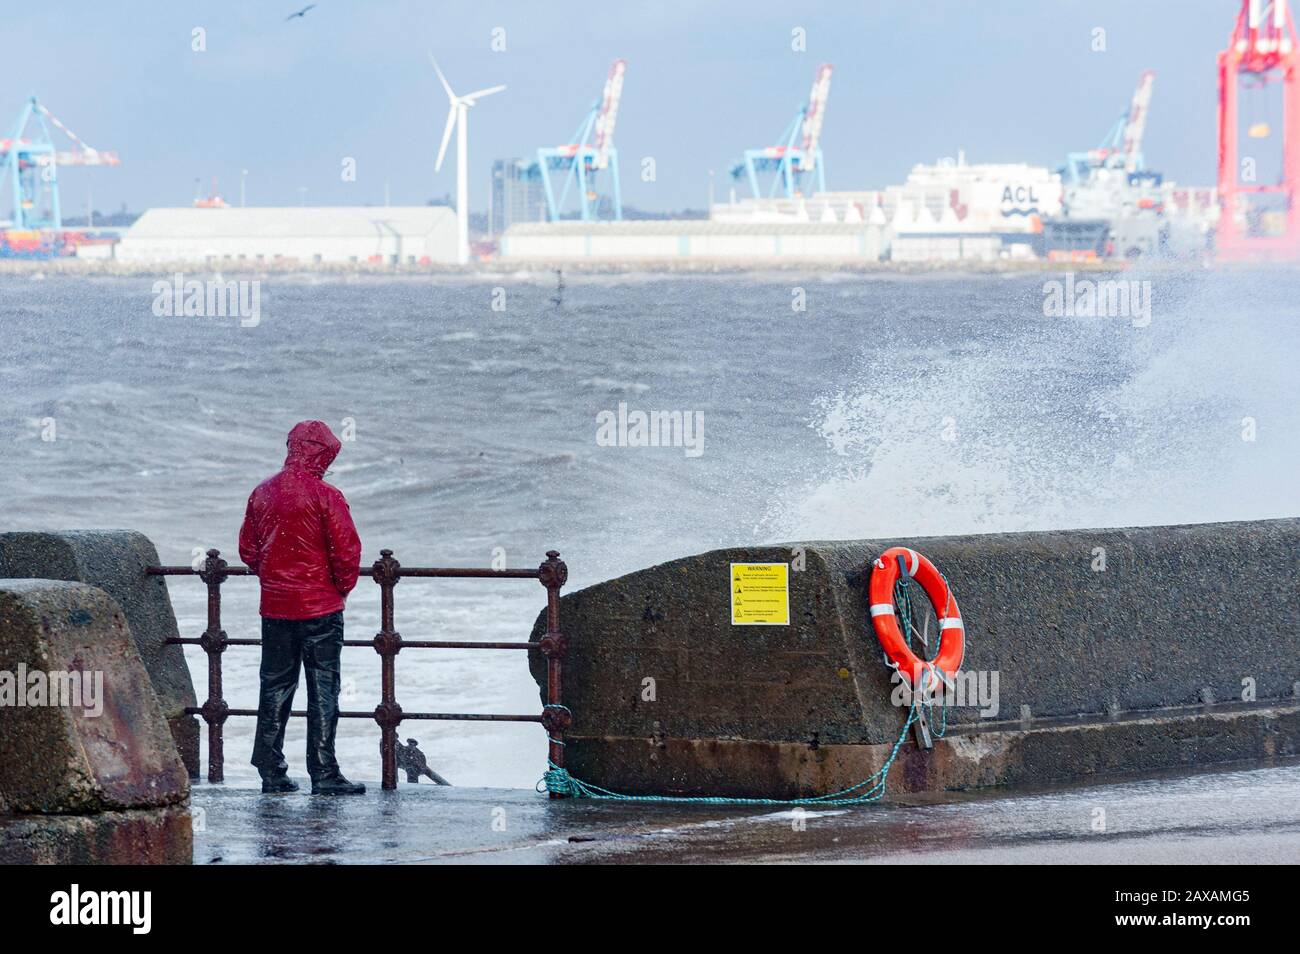 New Brighton, Wirral, UK. 11th February 2020. A man braves the River Mersey as the aftermath of Storm Ciara continues to hit New Brighton, on the Wirral peninsula.  With strong gale force winds and flooding, the cleanup operation now begins.  Credit: Paul Warburton/Alamy Live News Stock Photo